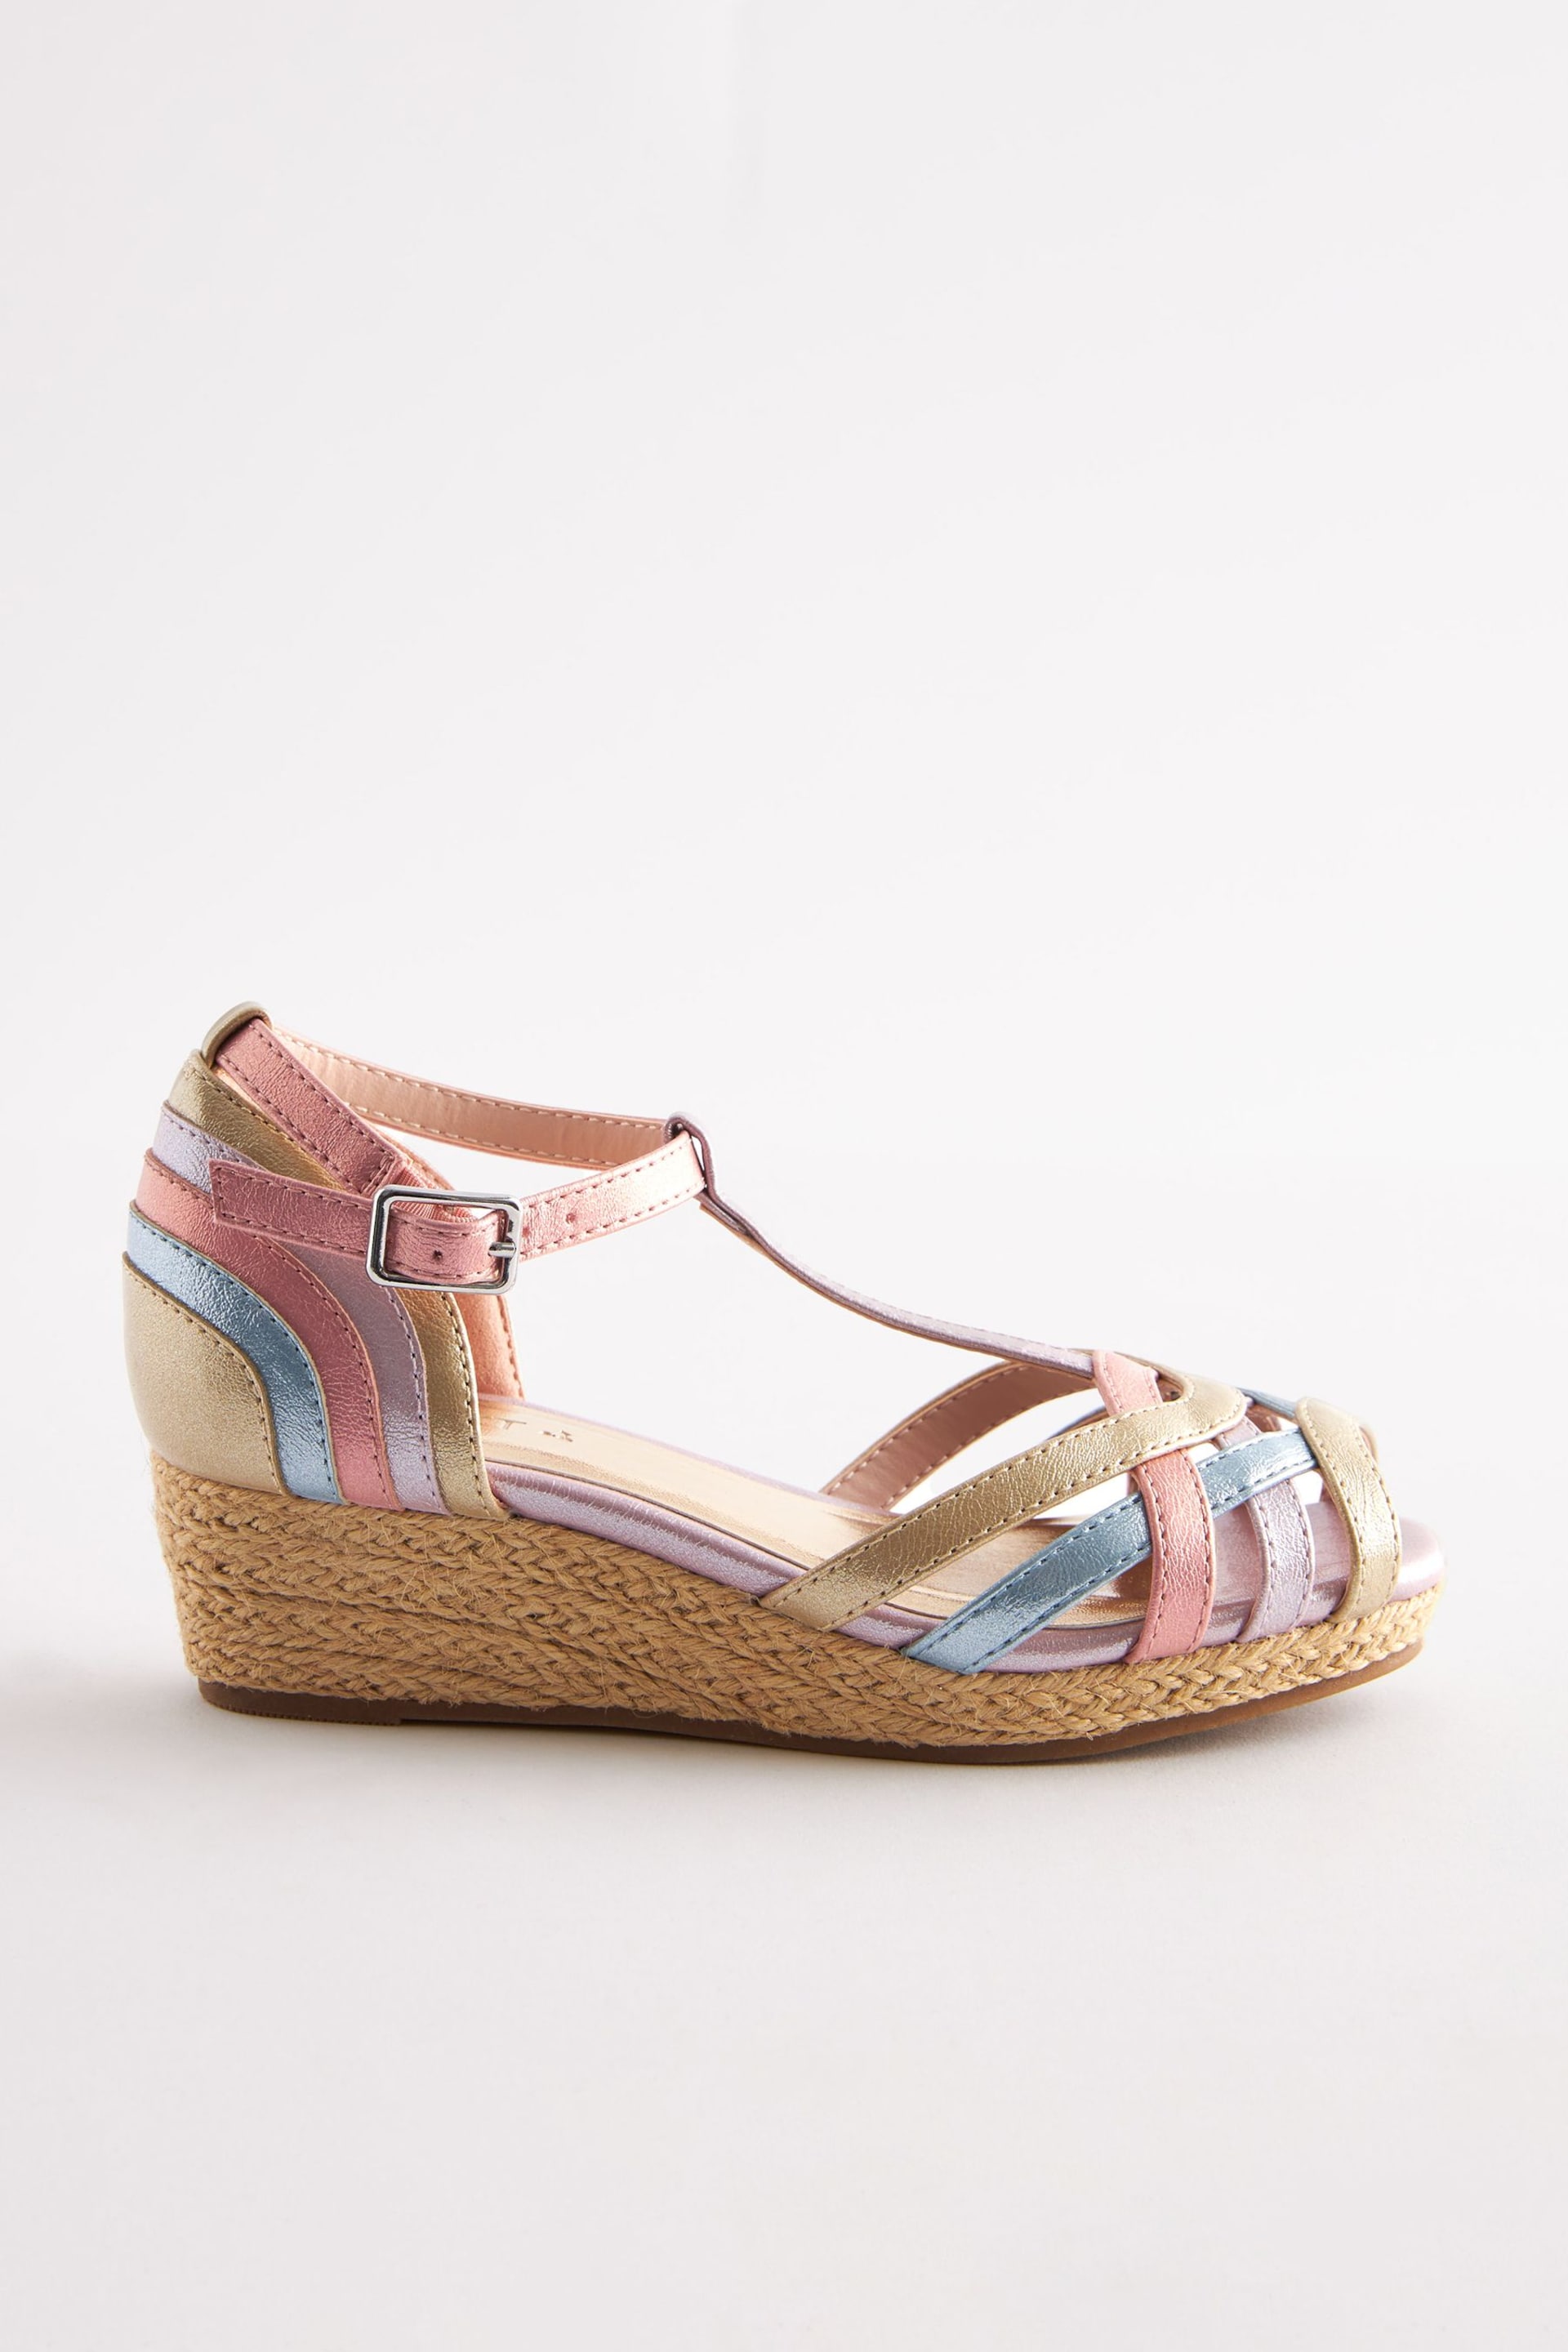 Pastel Rainbow Woven Wedge Ankle Strap Sandals - Image 2 of 5